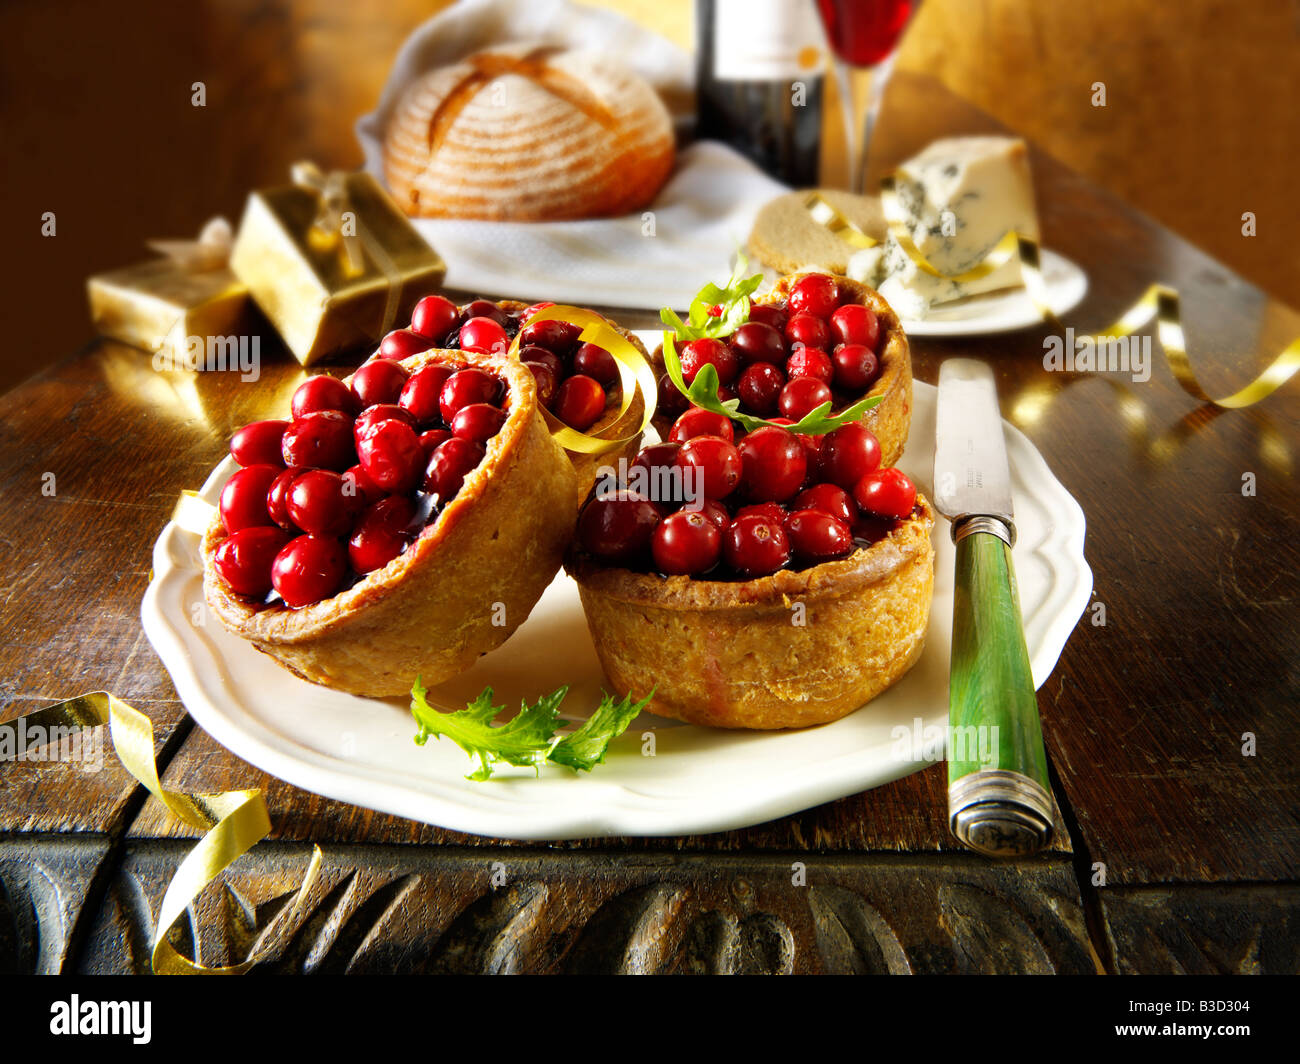 Cranberry topped pork pie - traditional British winter christmas food Stock Photo